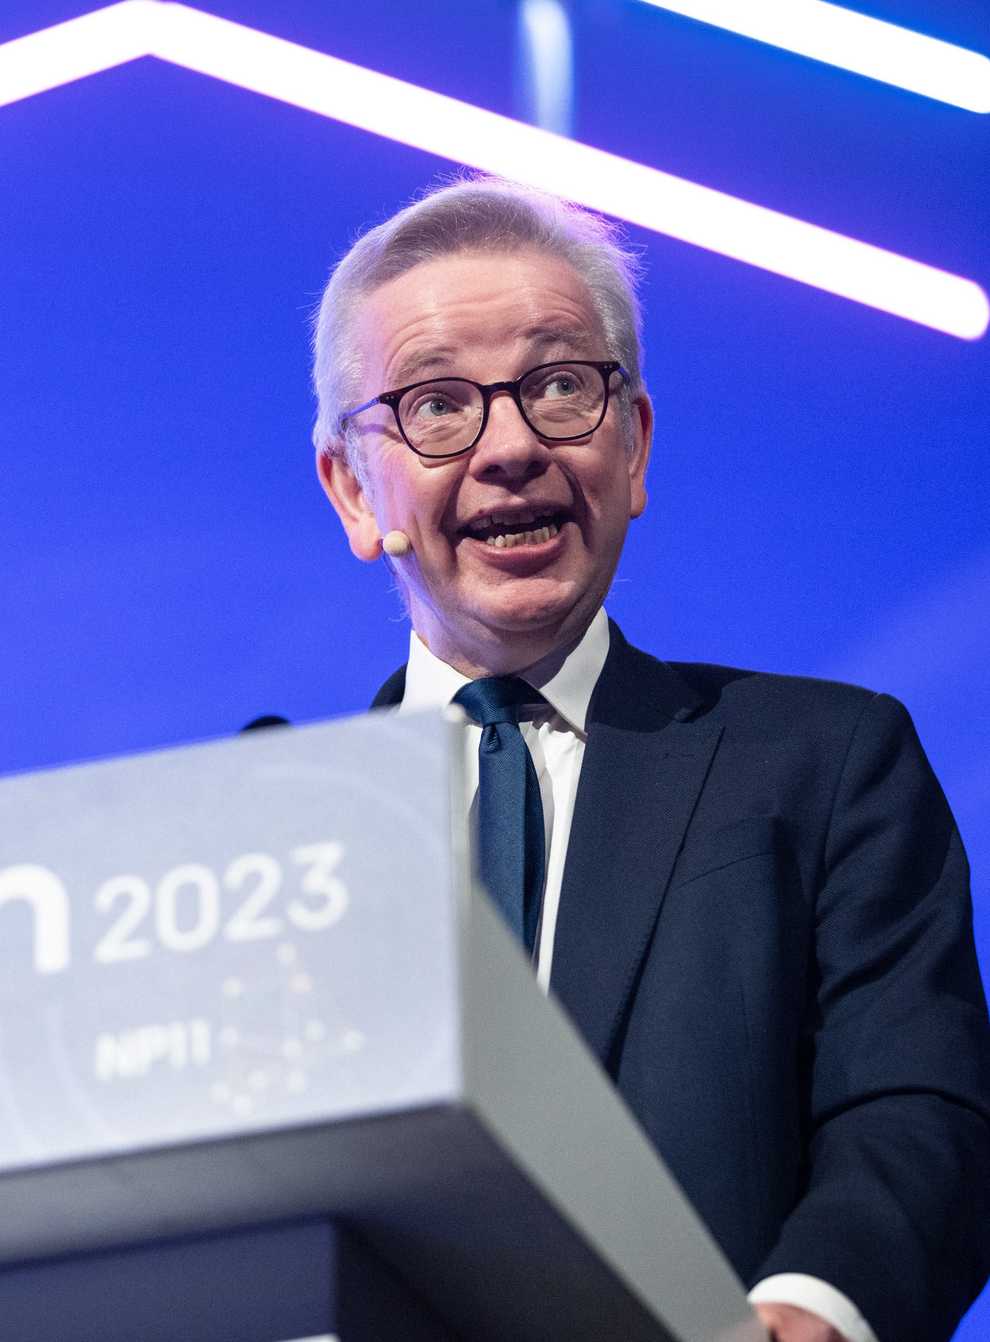 Michael Gove speaking at the Convention of the North (James Speakman/PA)